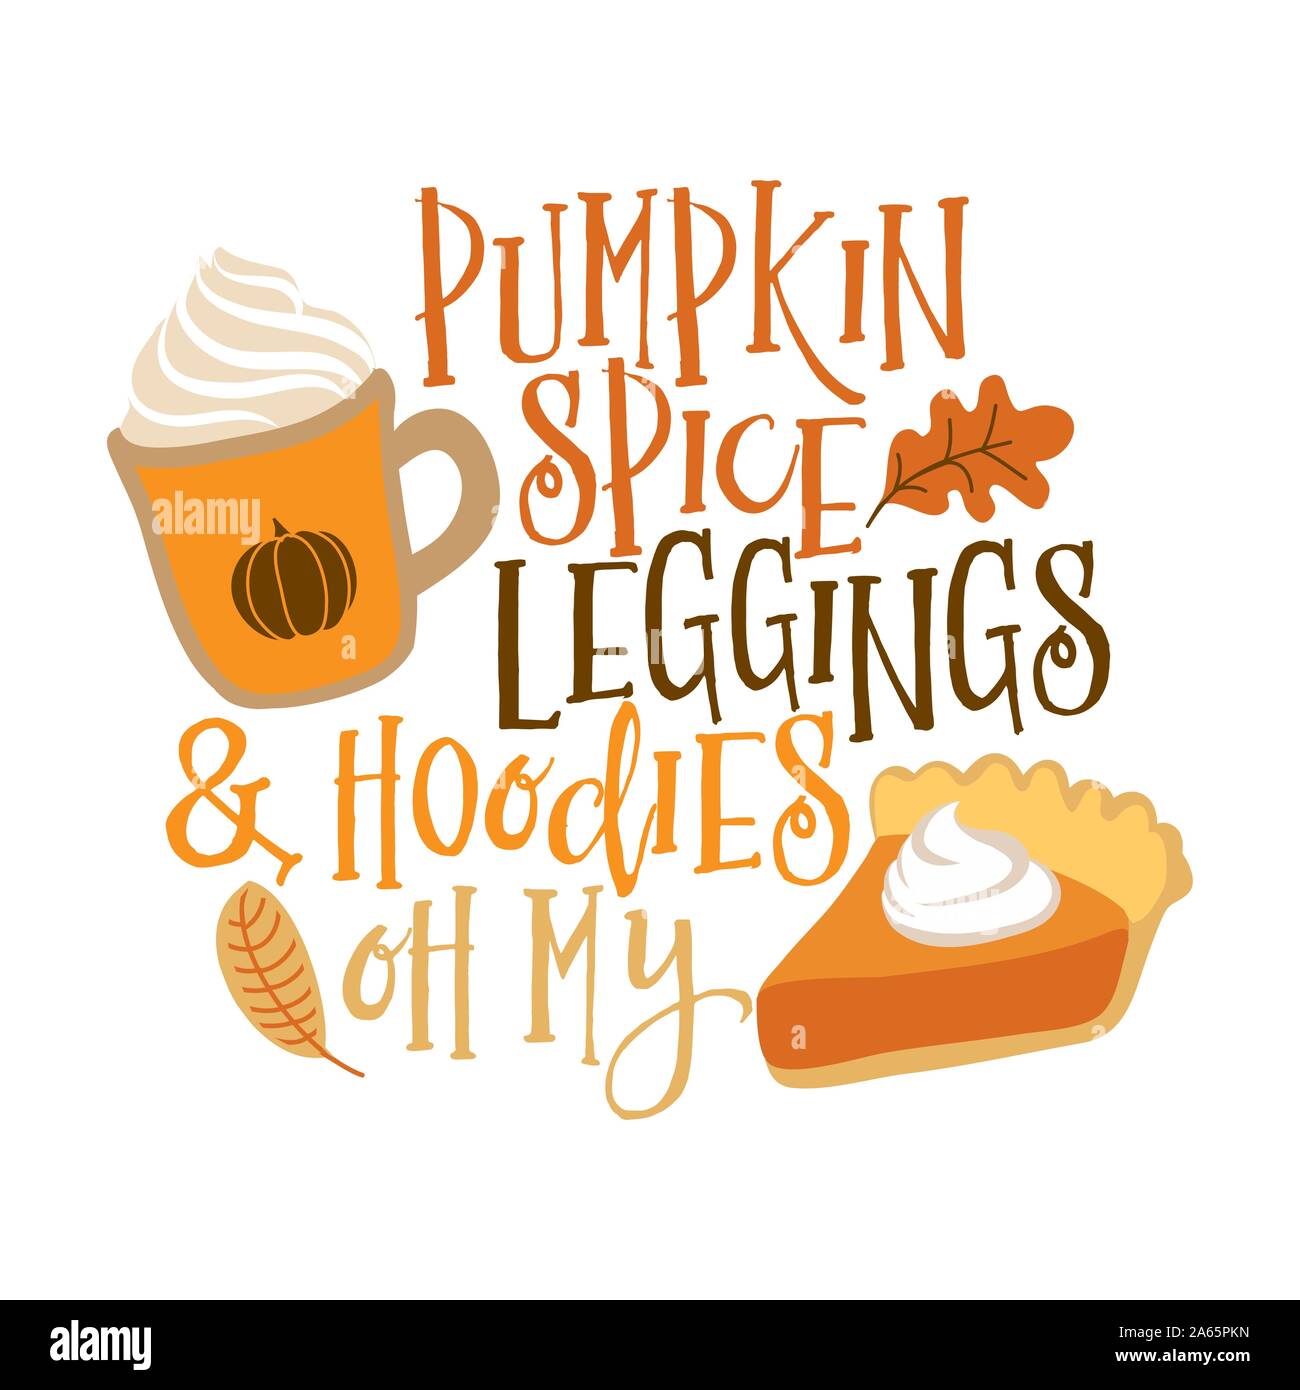 Pumpkin spice, leggings and Hoodies oh my - Hand drawn vector illustration. Autumn color poster. Good for scrap booking, posters, greeting cards, bann Stock Vector